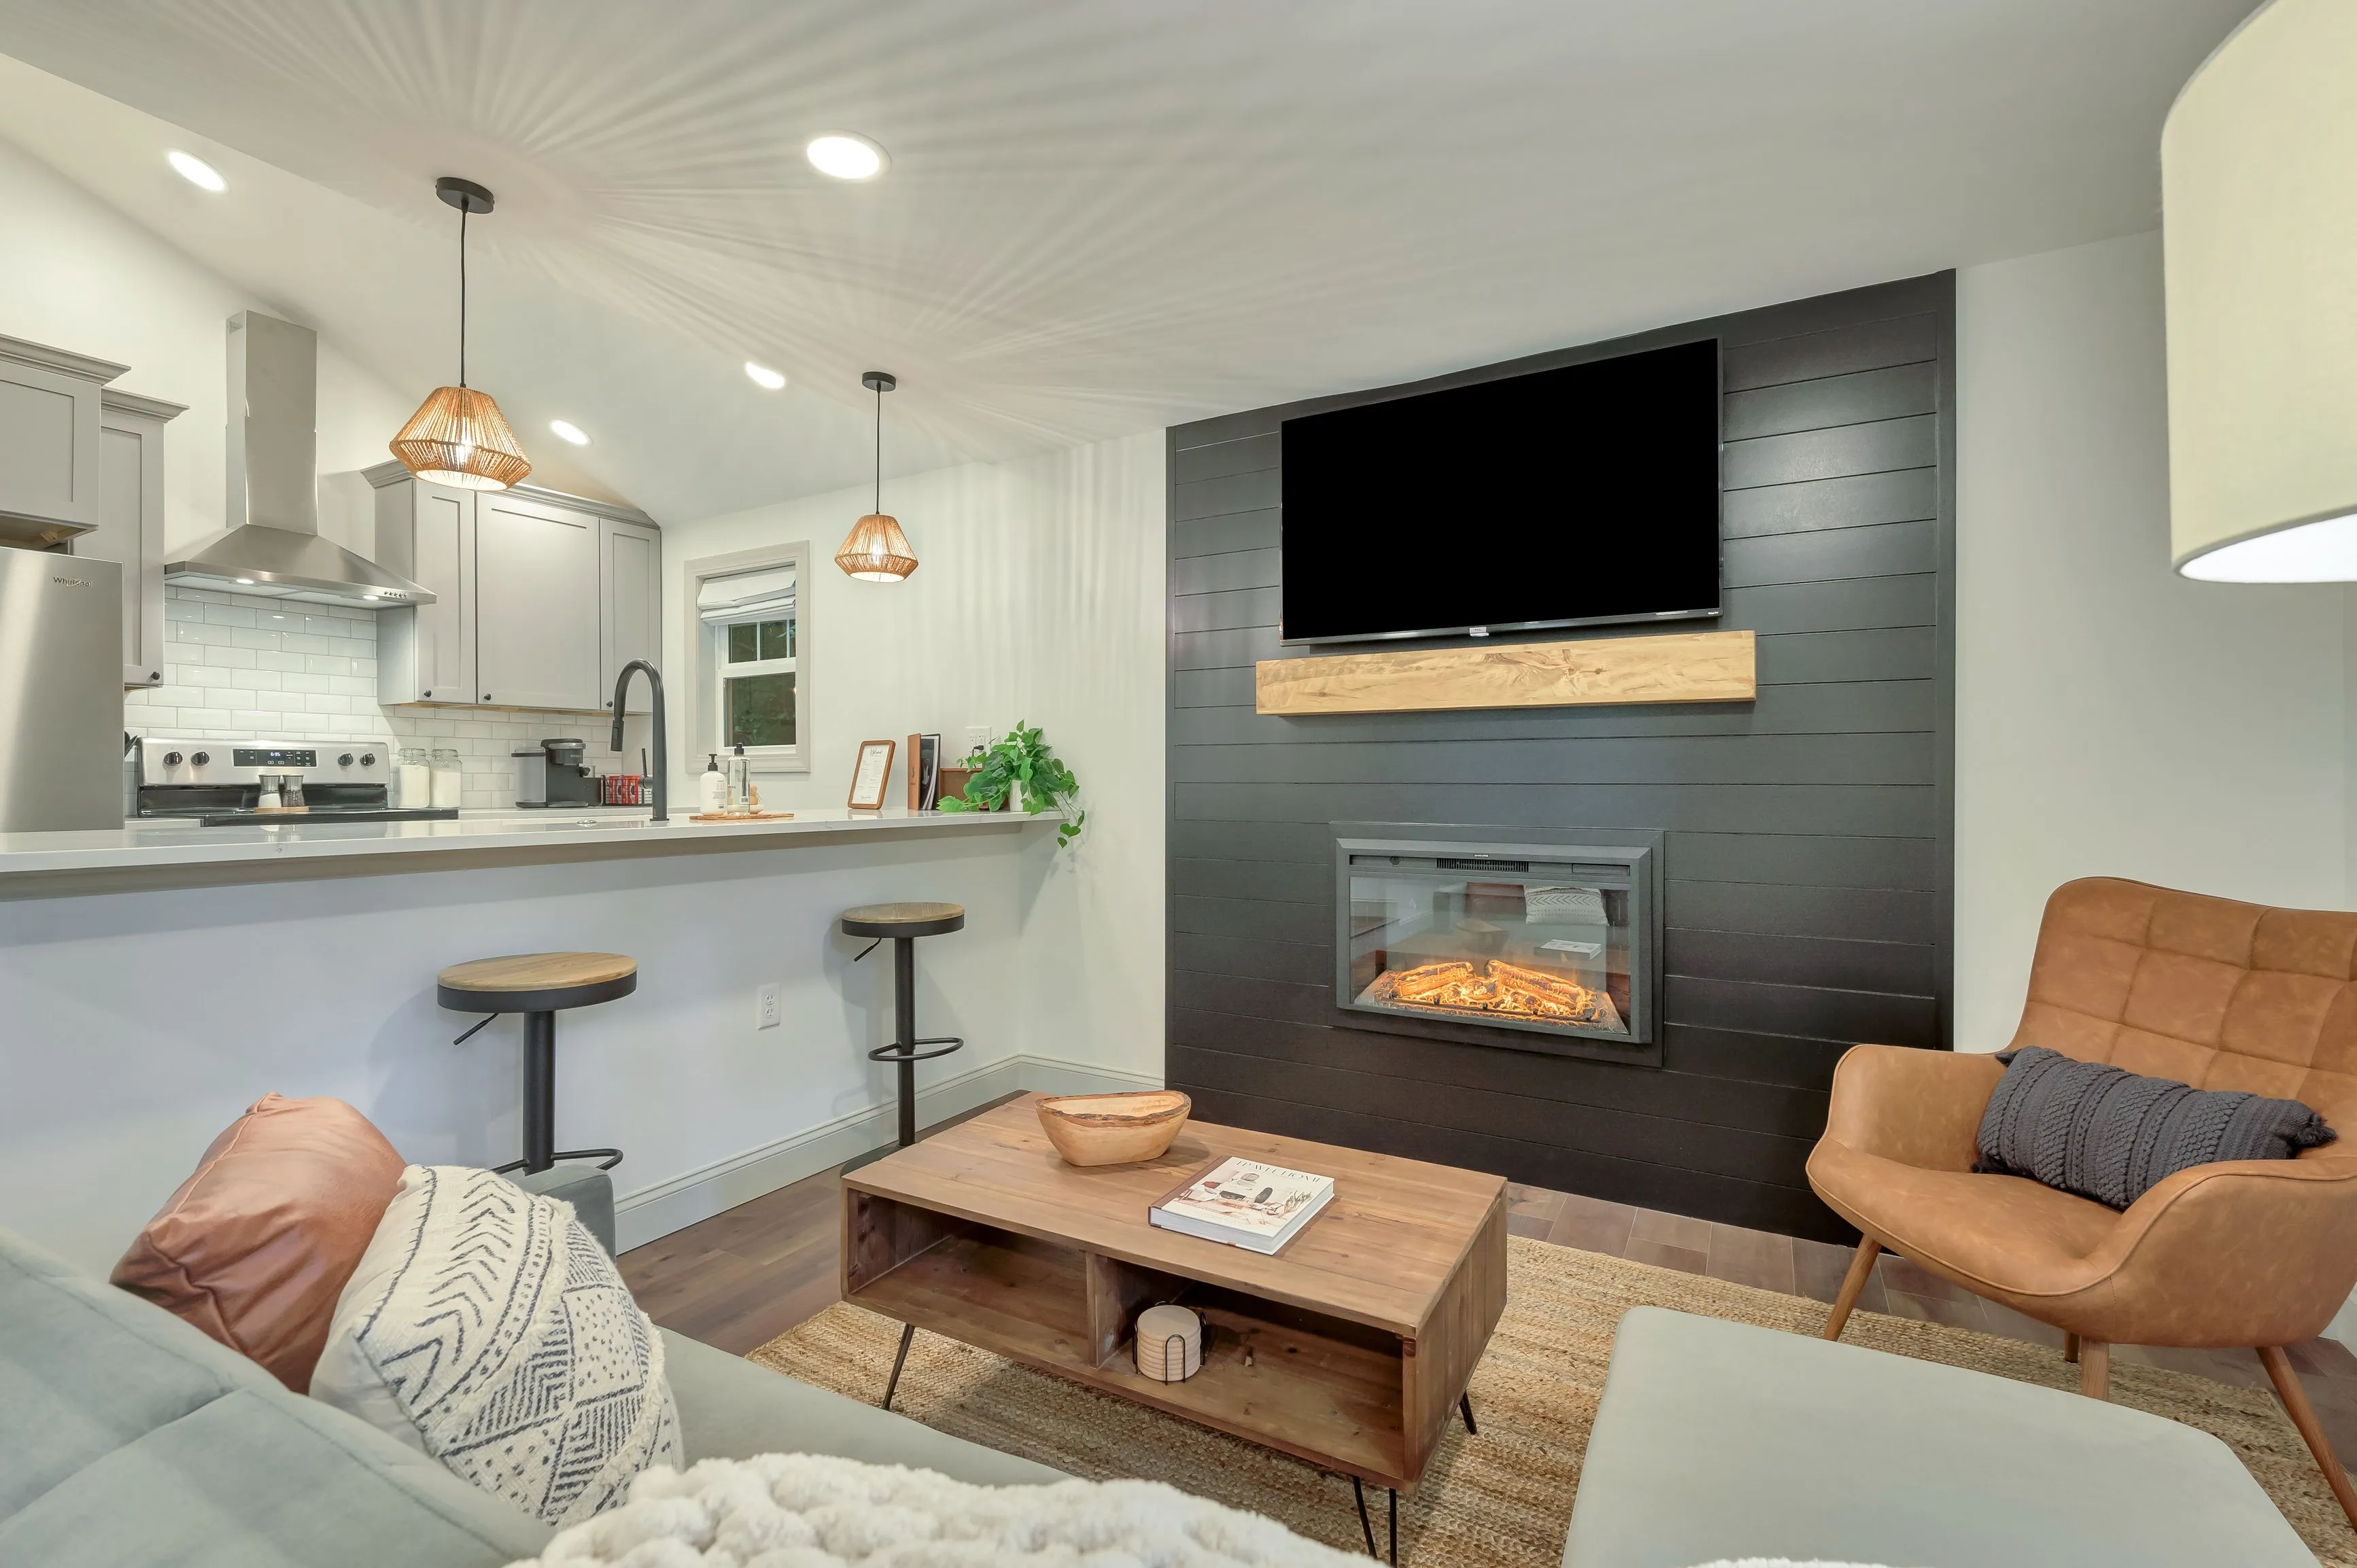 Modern living room seamlessly connected to a kitchen featuring a fireplace with a mounted TV above, cozy furnishings, and contemporary lighting.